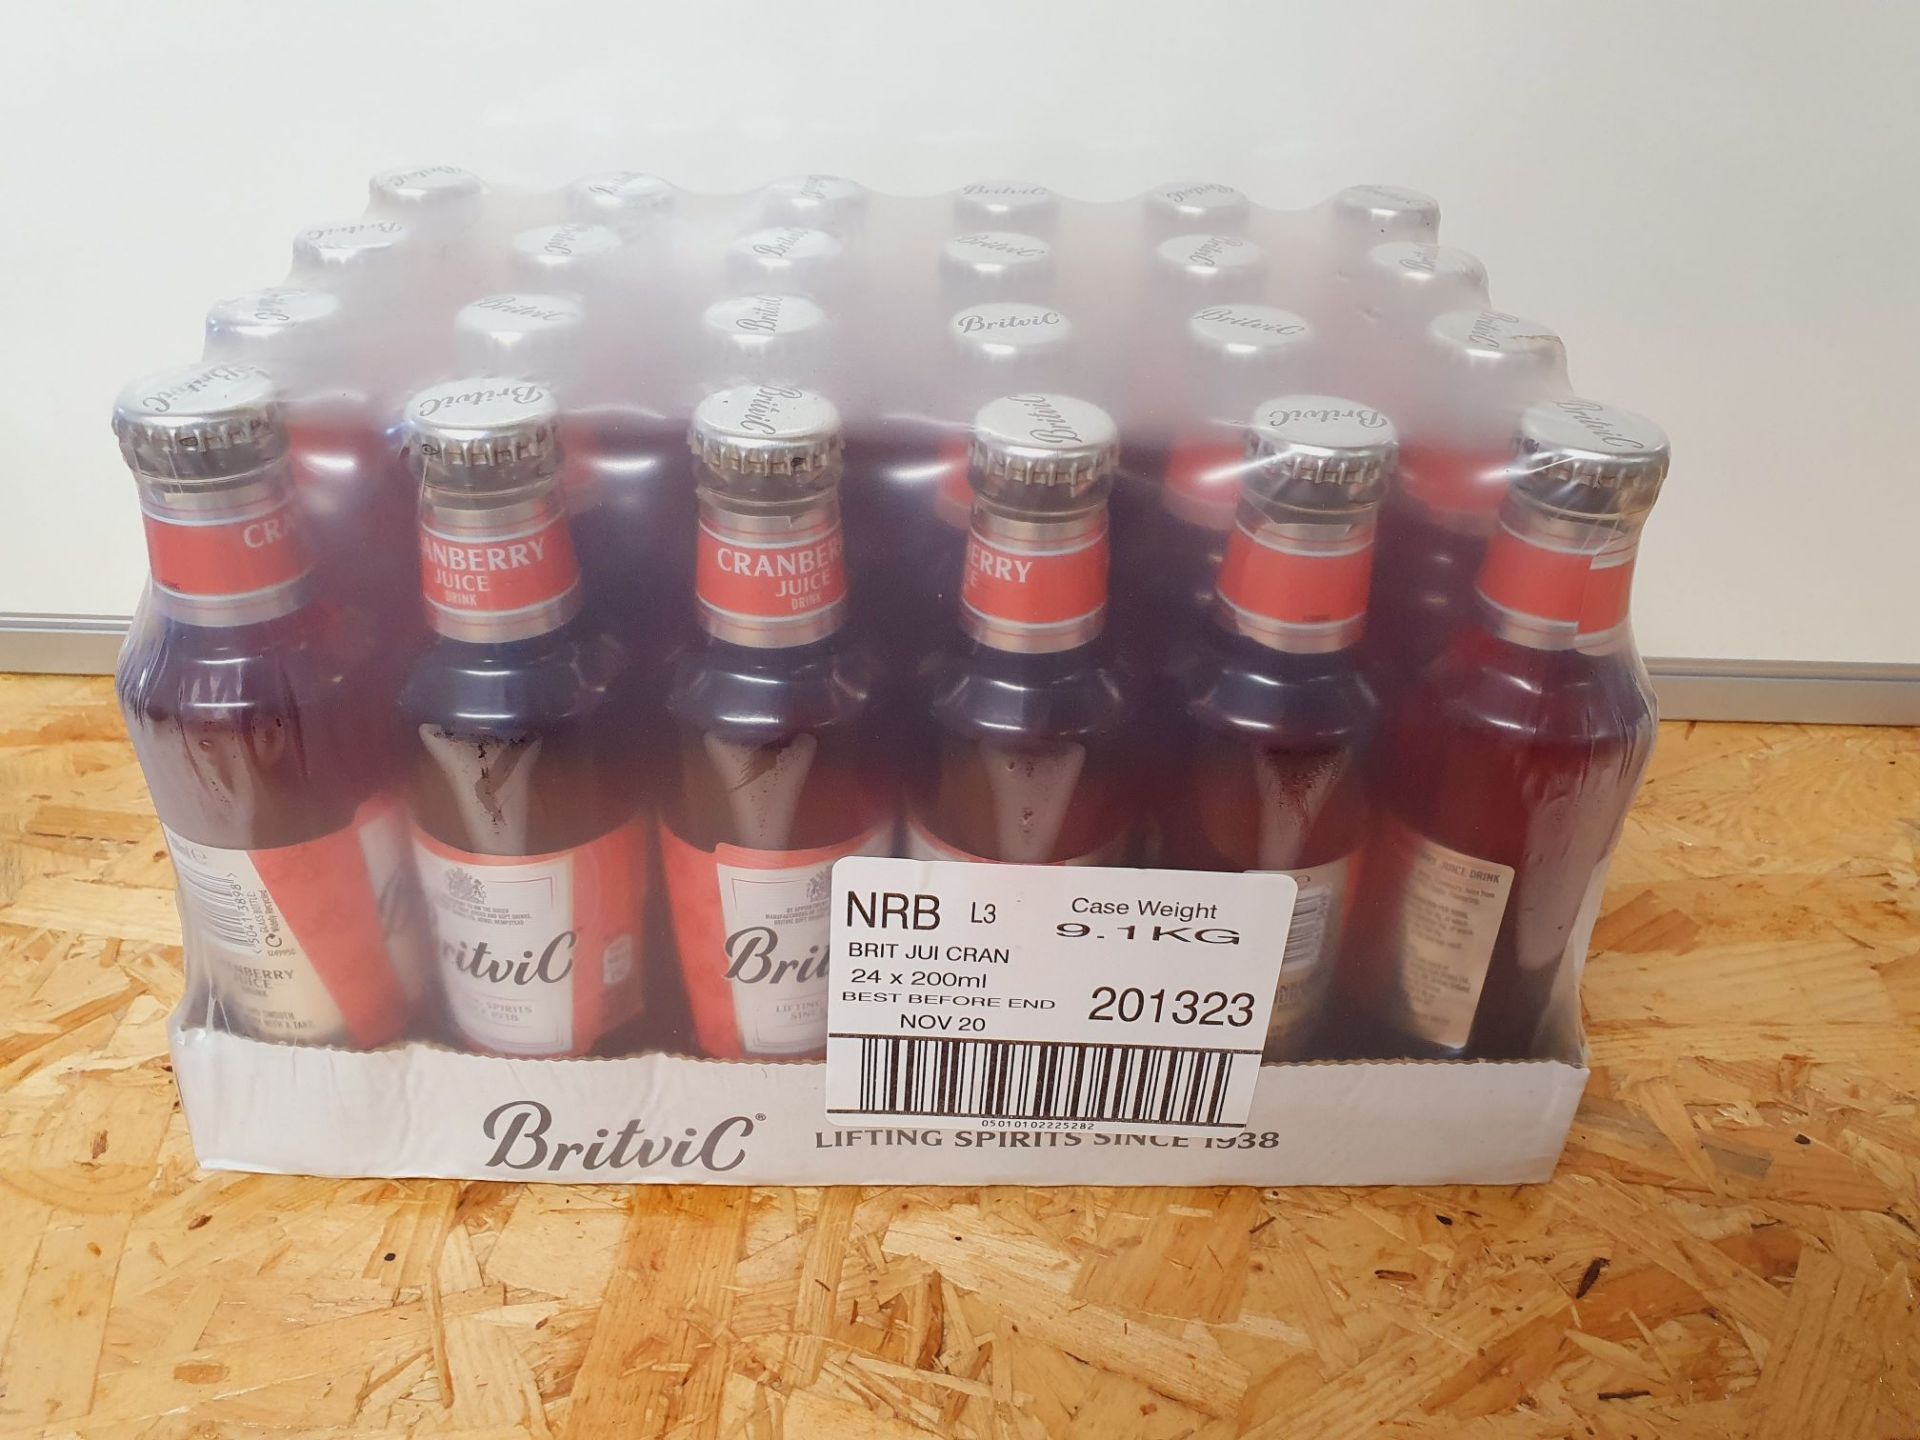 ONE LOT TO CONTAIN ONE CASE OF BRITVIC CRANBERRY JUICE. 24 BOTTLES PER CASE, 200ML BOTTLES. BEST